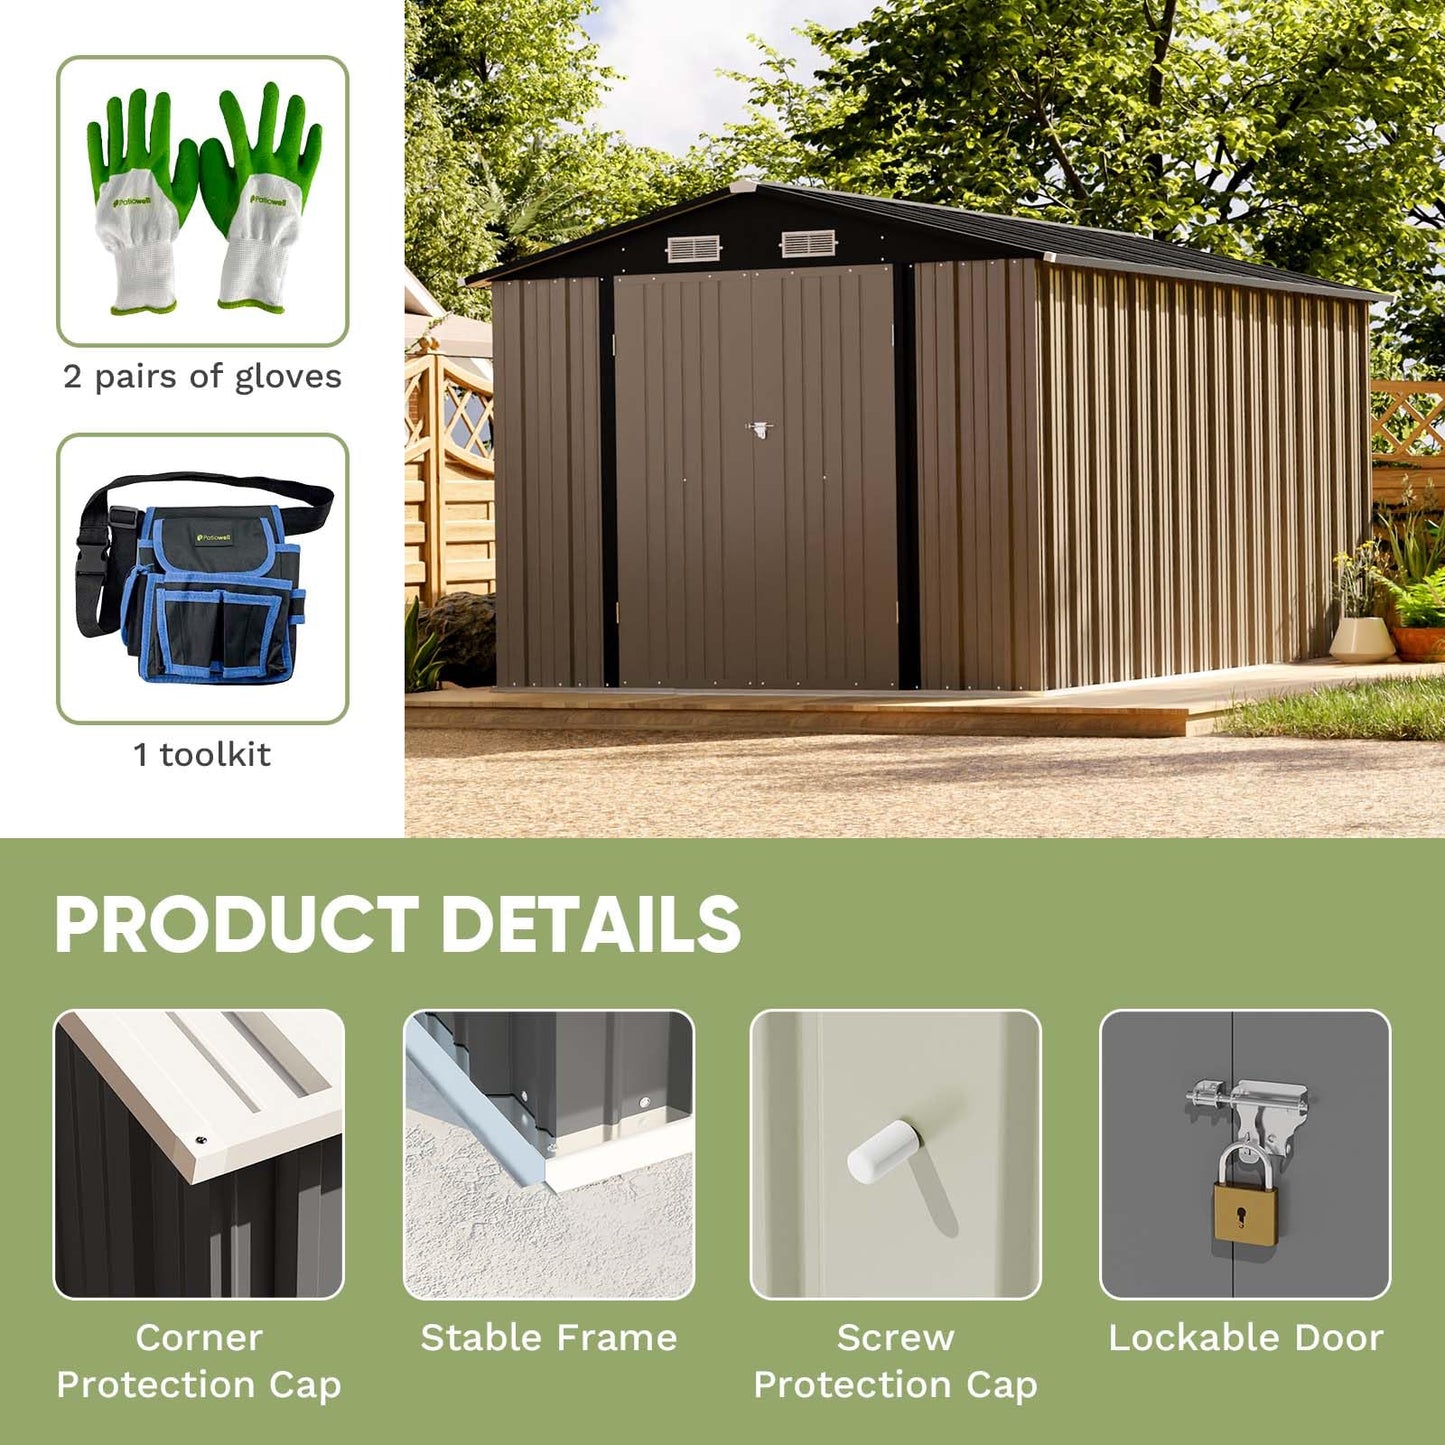 Patiowell 8' x 12' Metal Storage Shed for Outdoor, Steel Yard Shed with Design of Lockable Doors, Utility and Tool Storage for Garden, Backyard, Patio, Outside Use, Brown